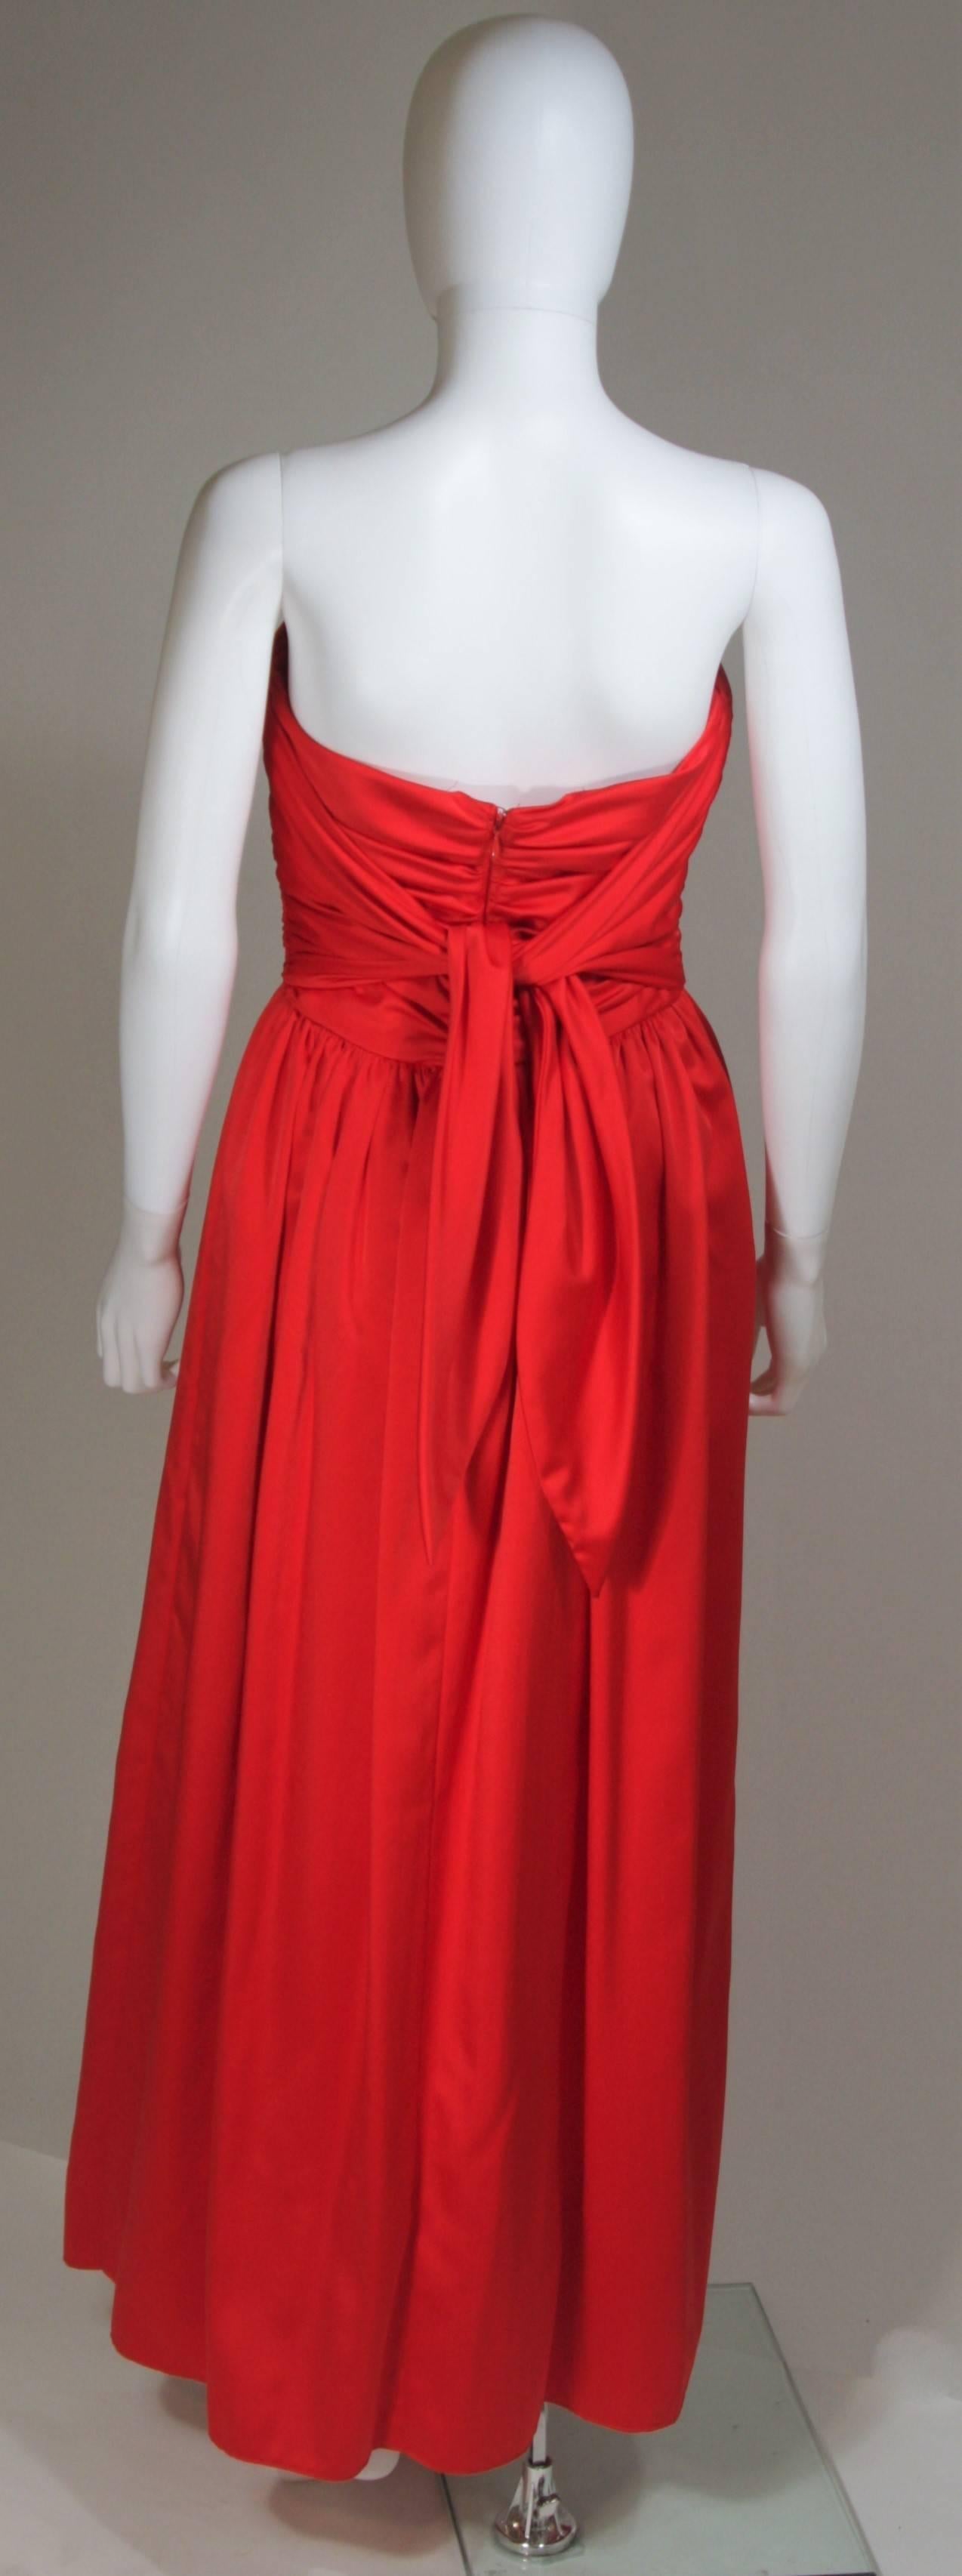 ANTHONY MUTO Red Gown with Gathered Bodice and Waist Tie Size 4-6 For Sale 2